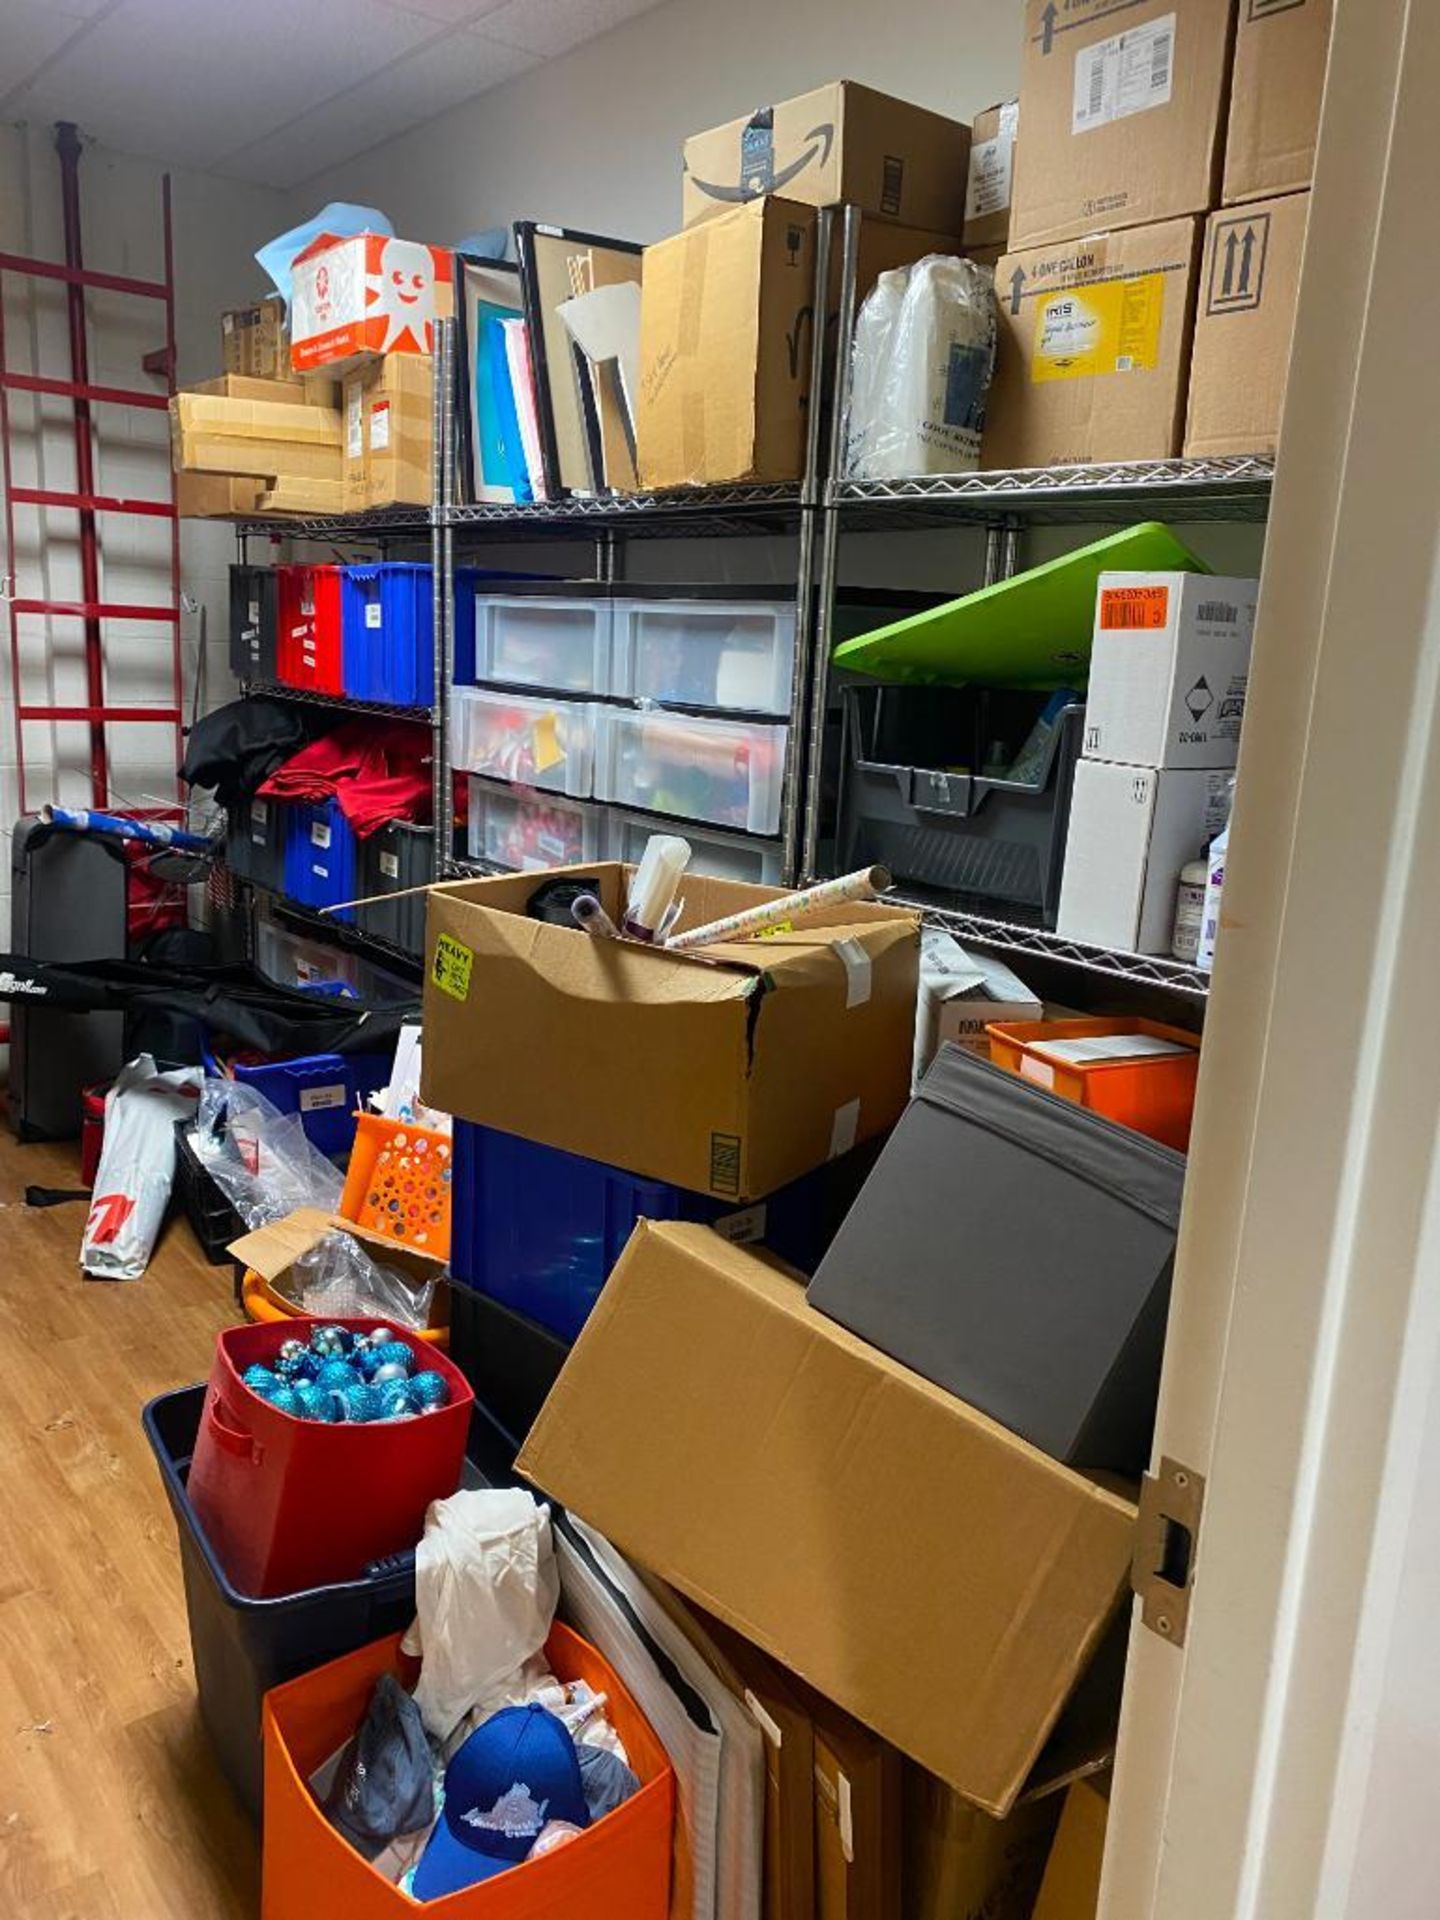 Content of Office Supply Closet: Shelving, Decorations, Desk, & Bins